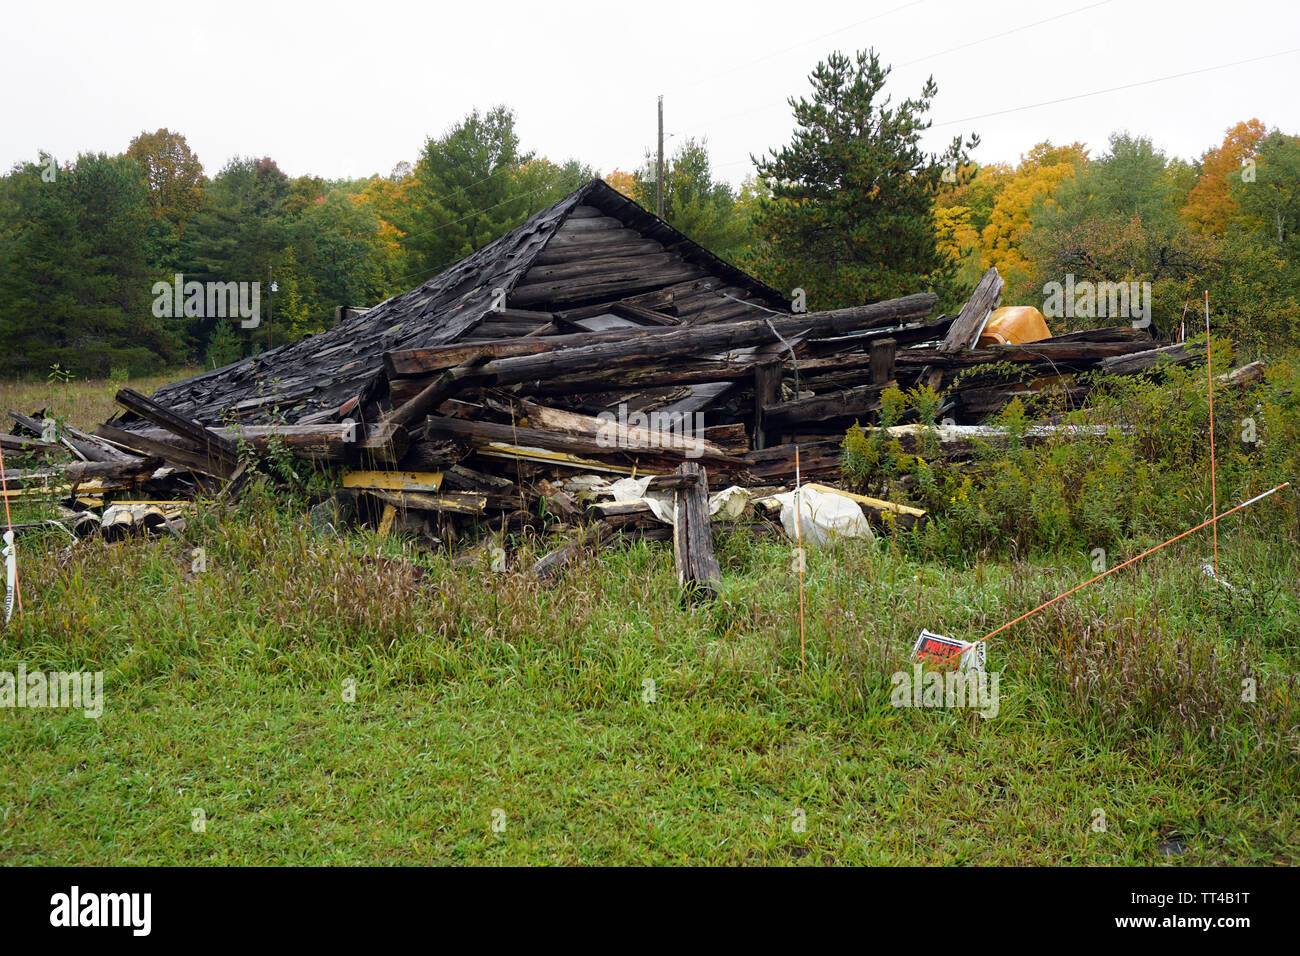 Collapsed log cabin Stock Photo